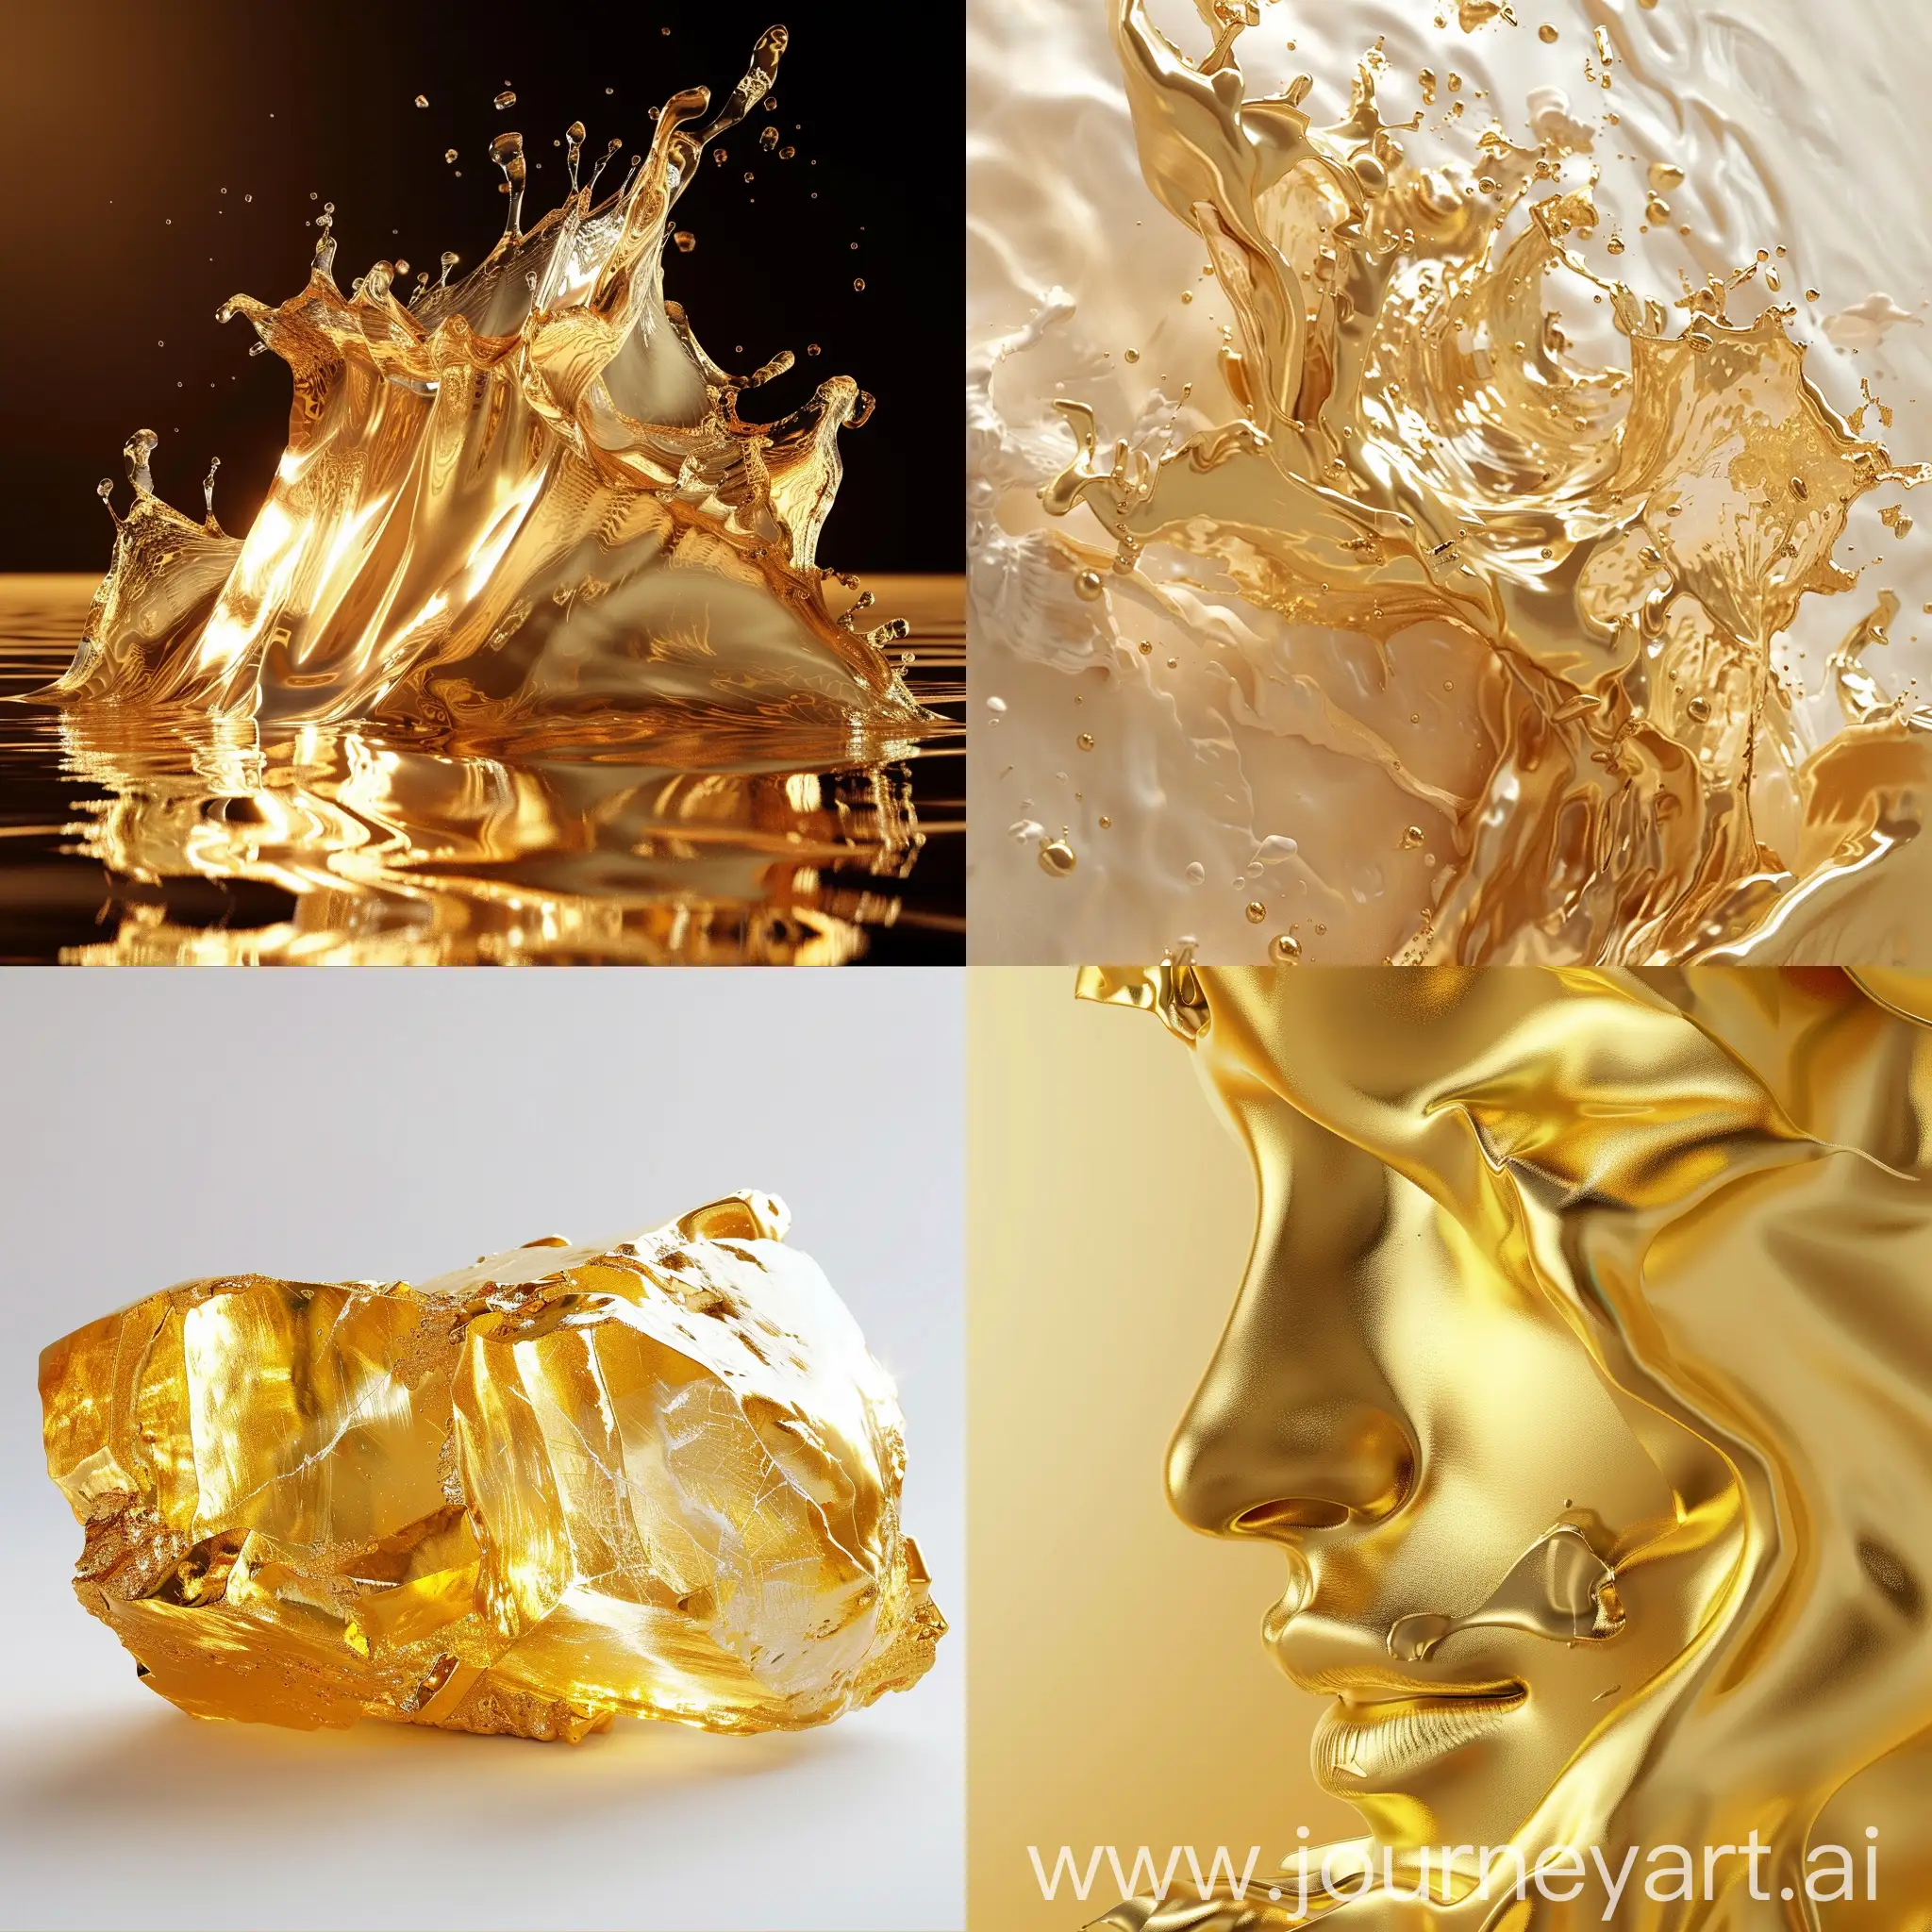 Realistic-Golden-Ice-Sculpture-Creating-a-Chilling-Ambiance